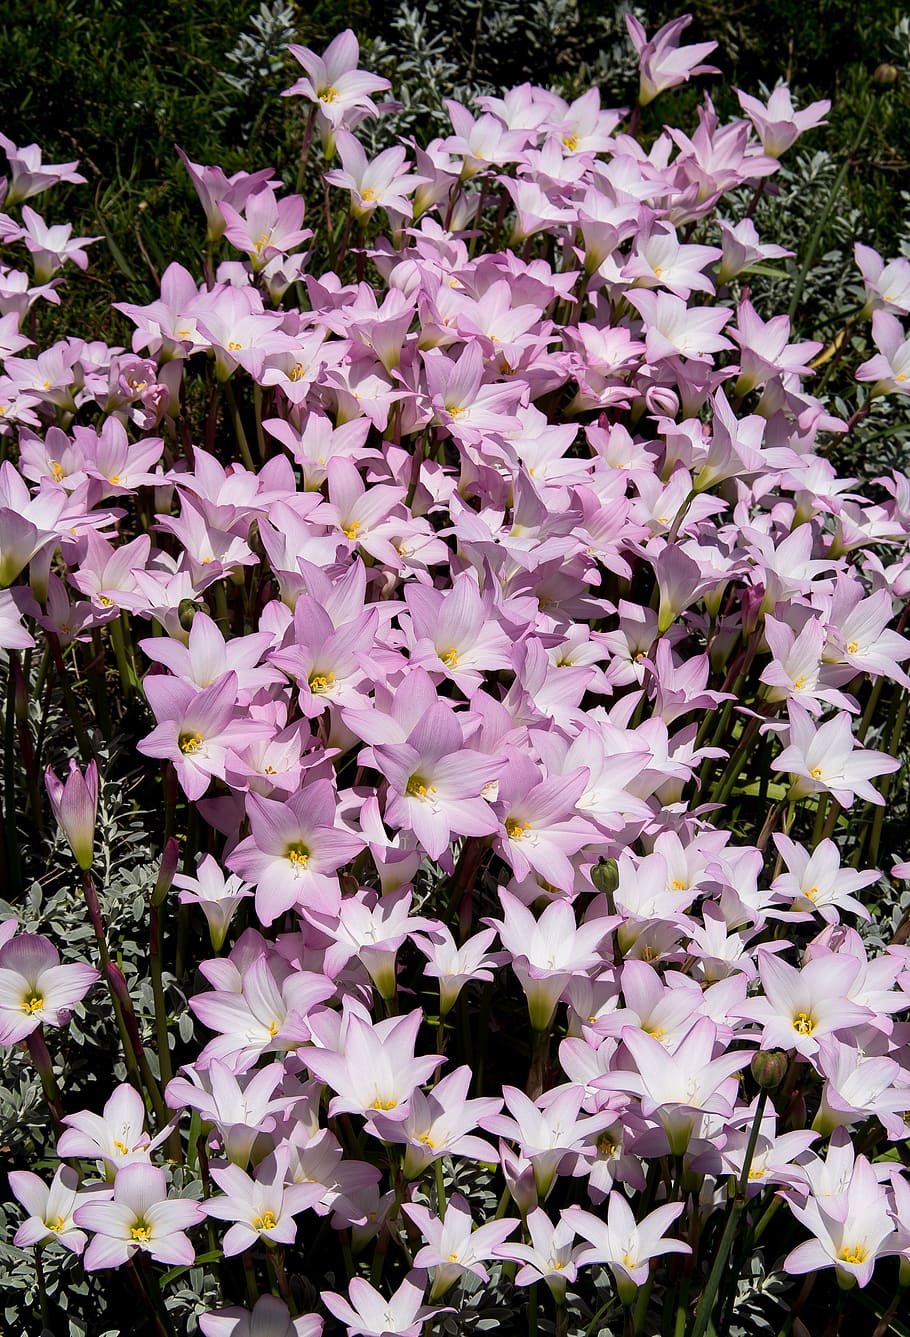 rain lilies, zephyranthes grandiflora, pink, bulb, flower, floral, bloom, blossom, petals, many